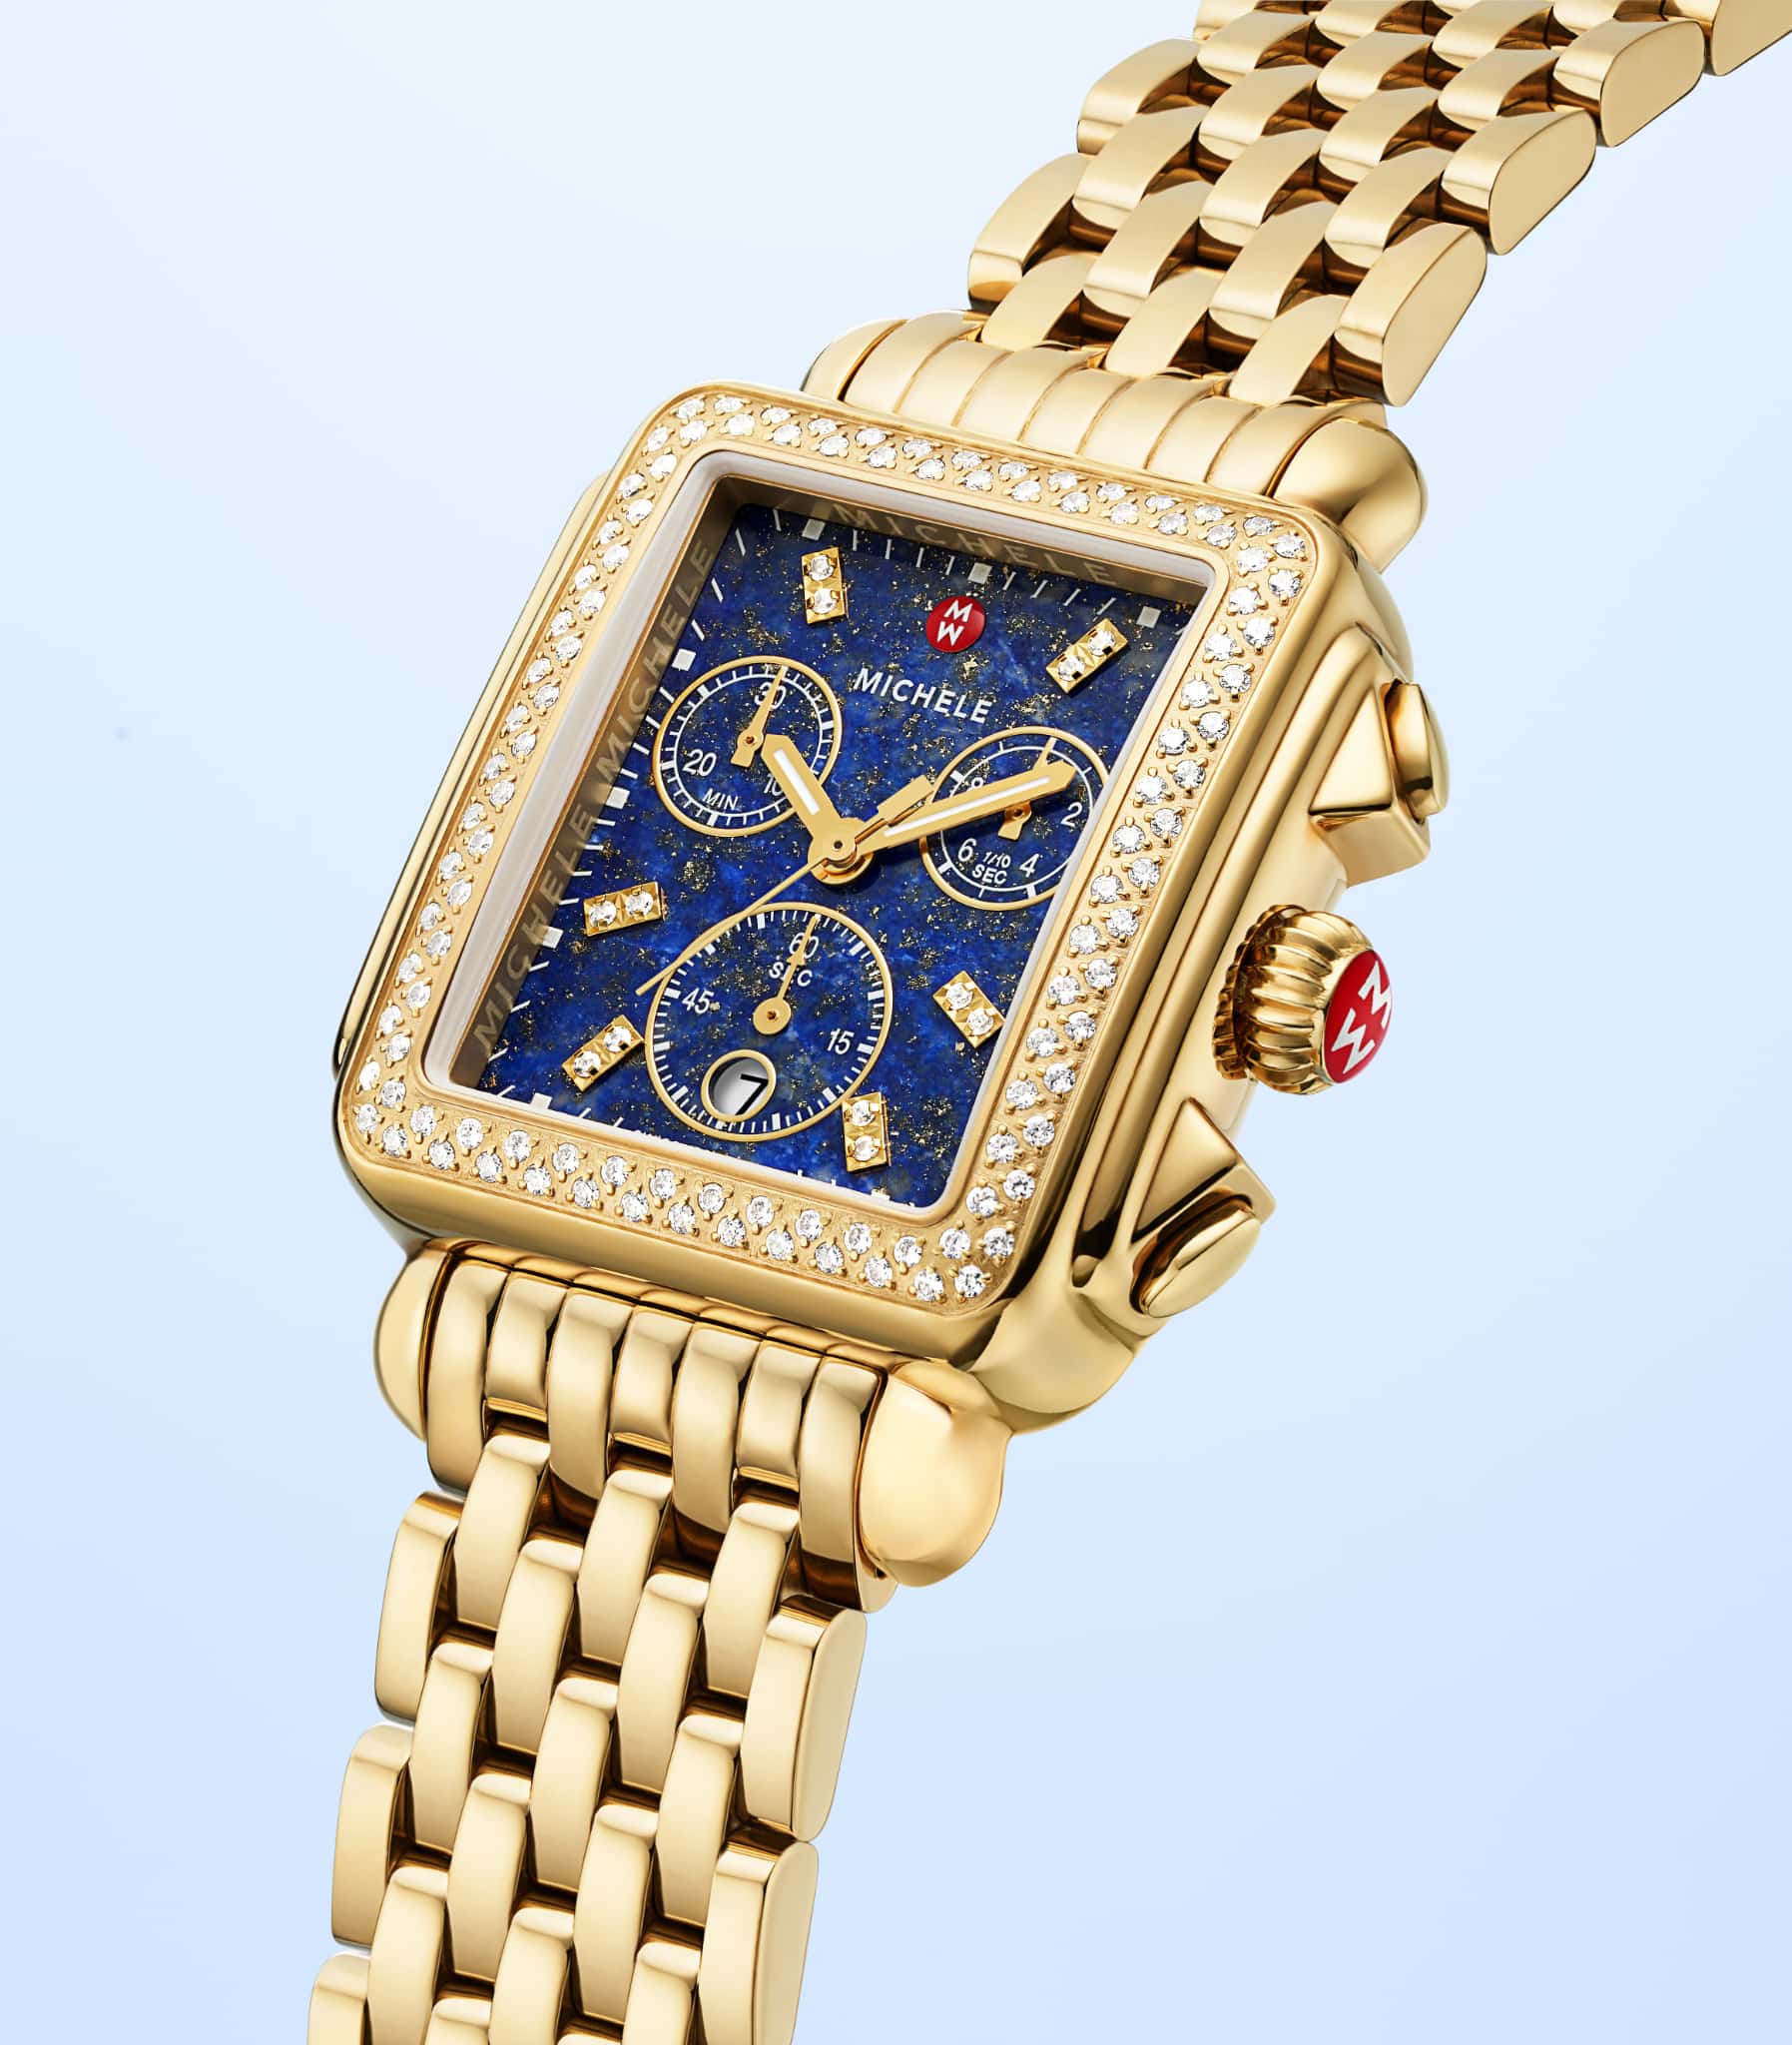 MICHELE Deco watch with blue face in gold plating